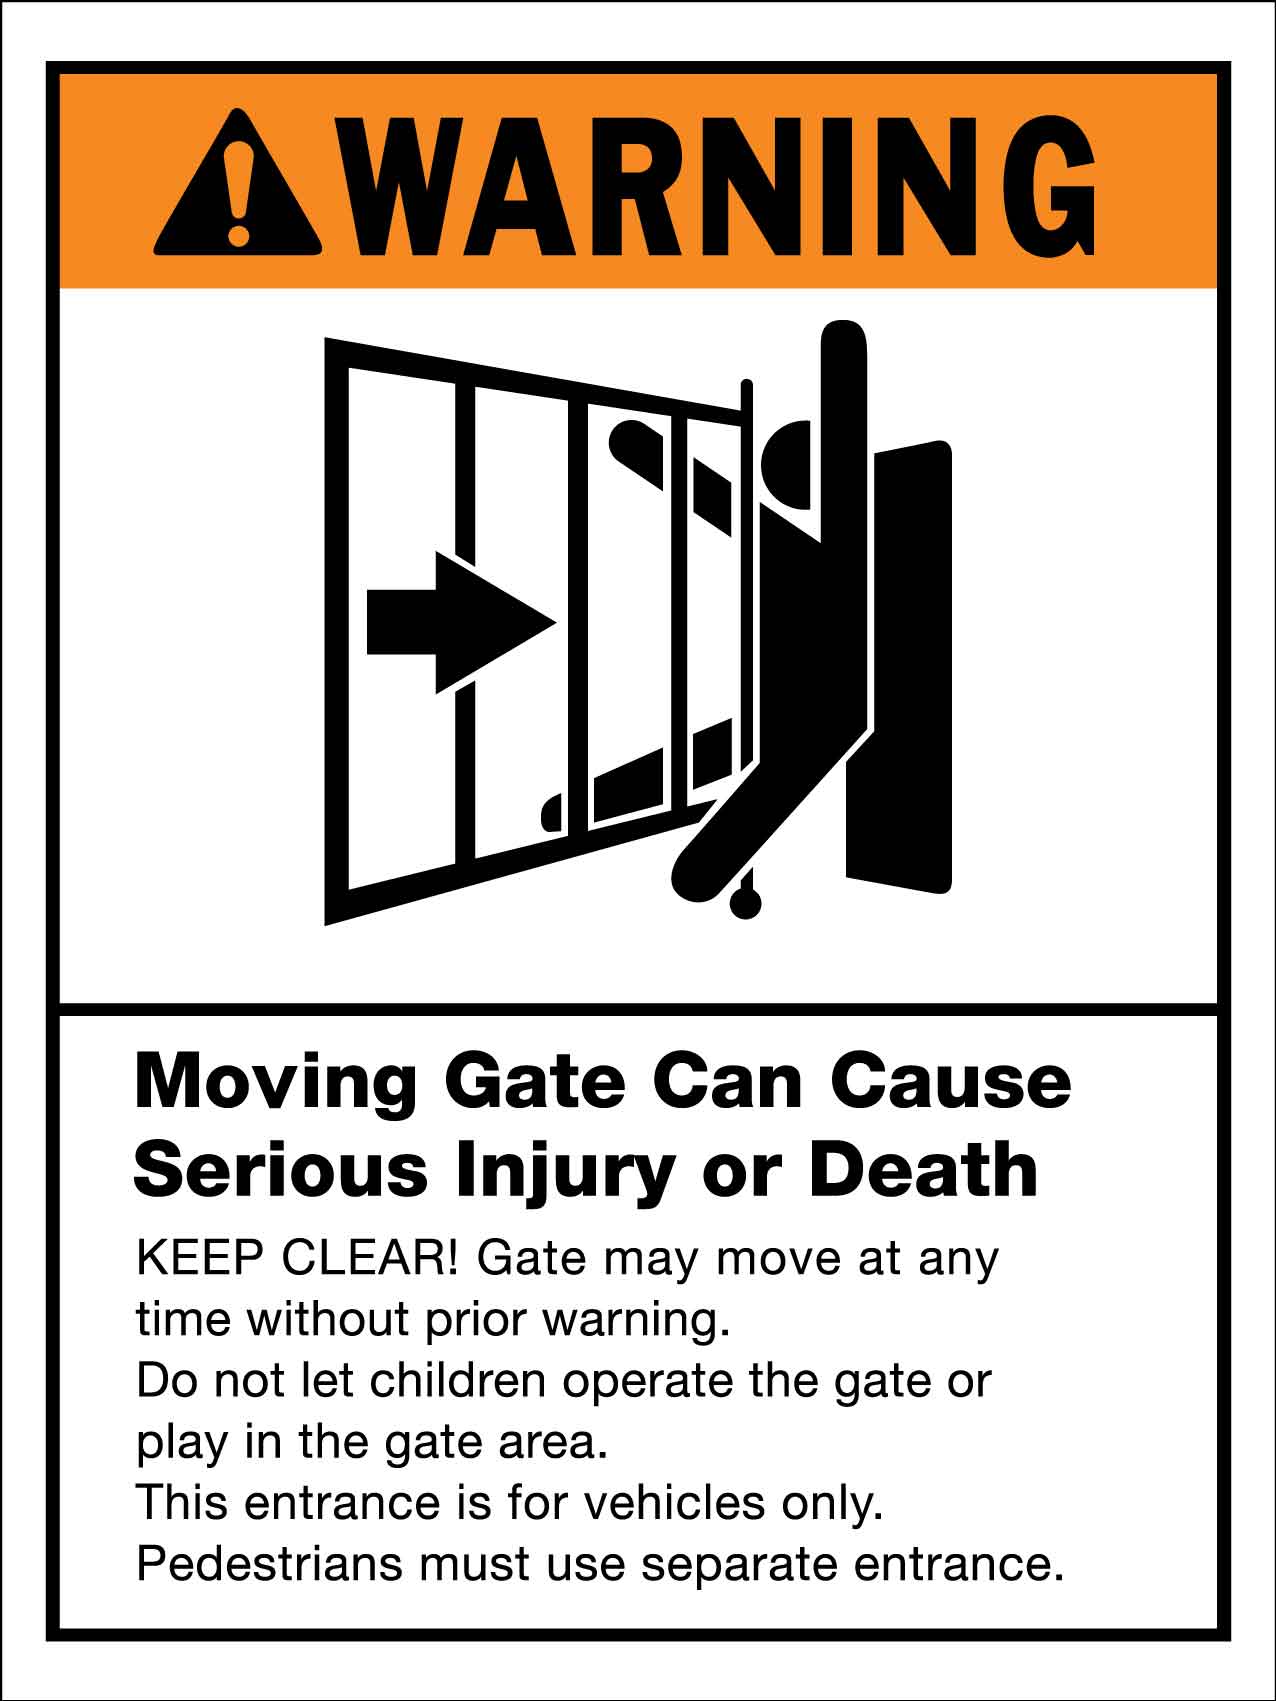 Warning Moving Gate Can Serious Injury or Death Sign